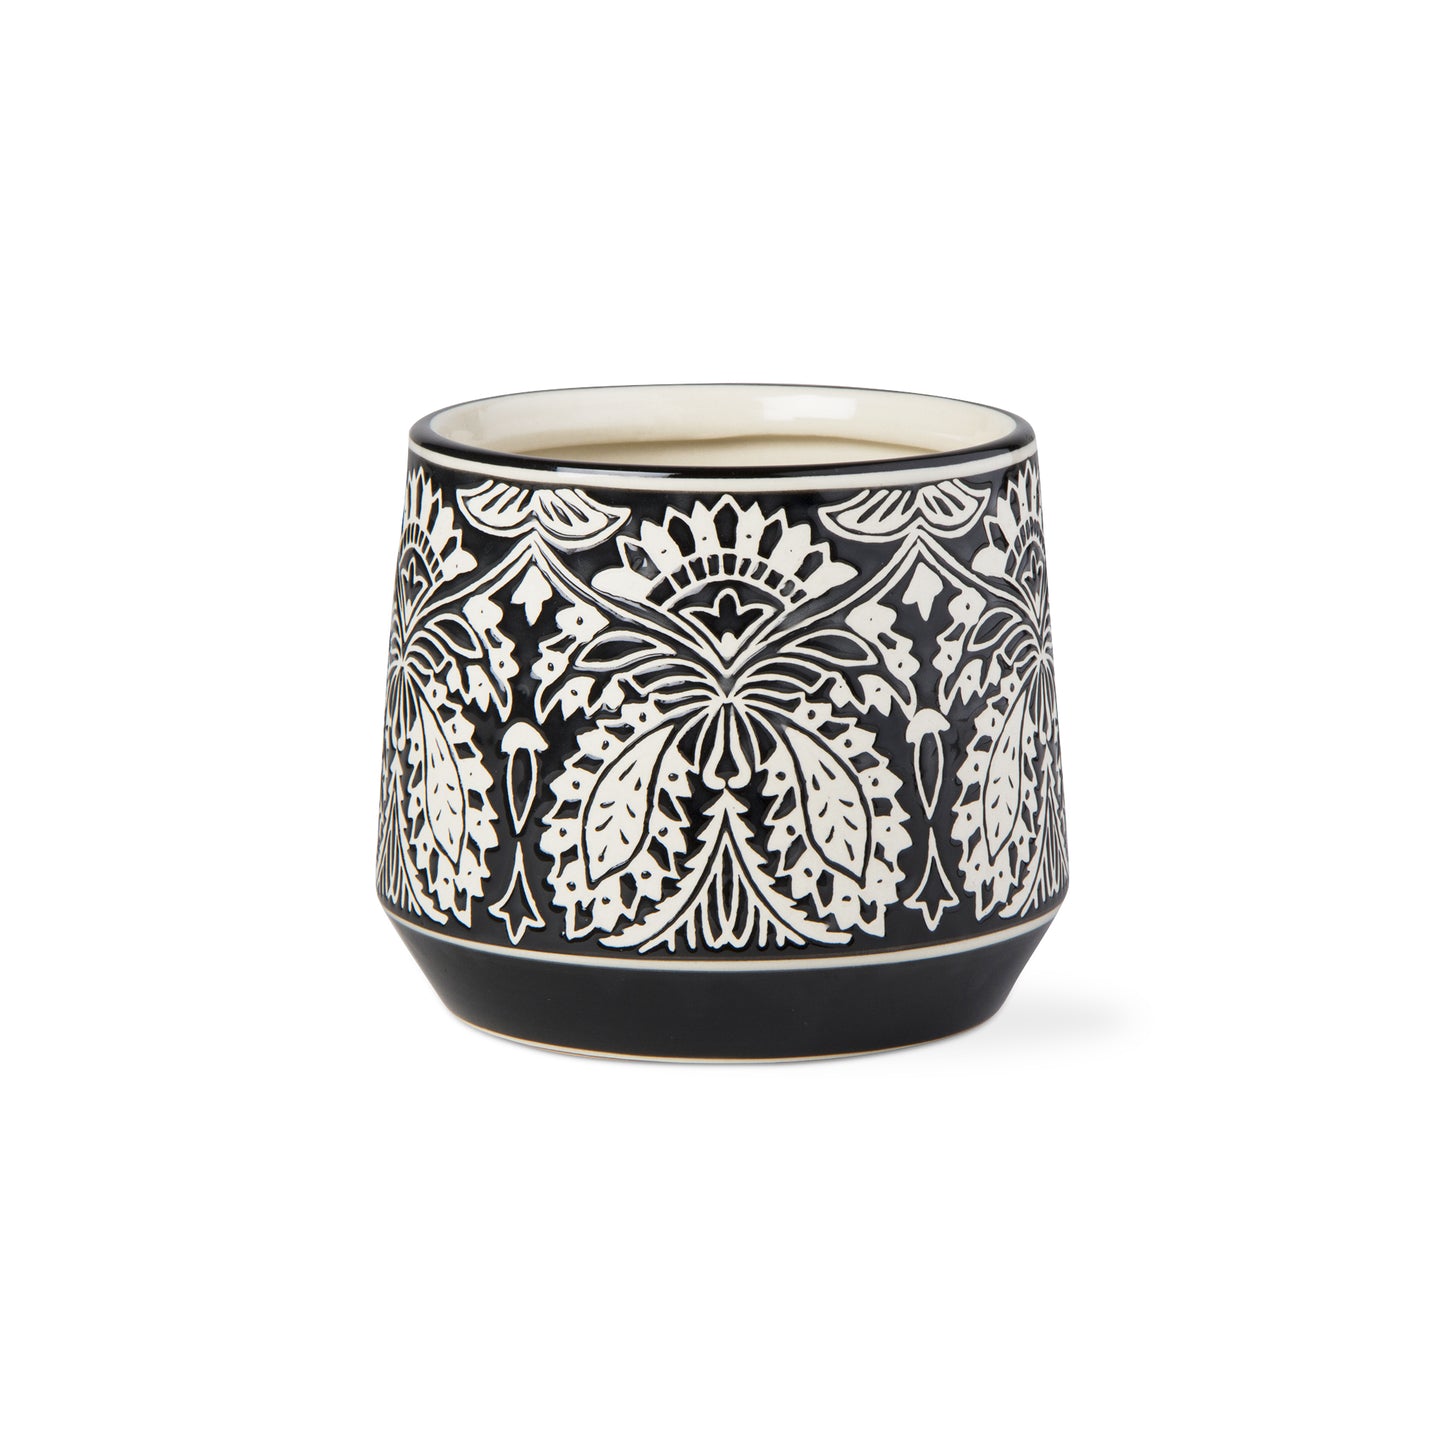 black and white planter with abstract floral design on white background.